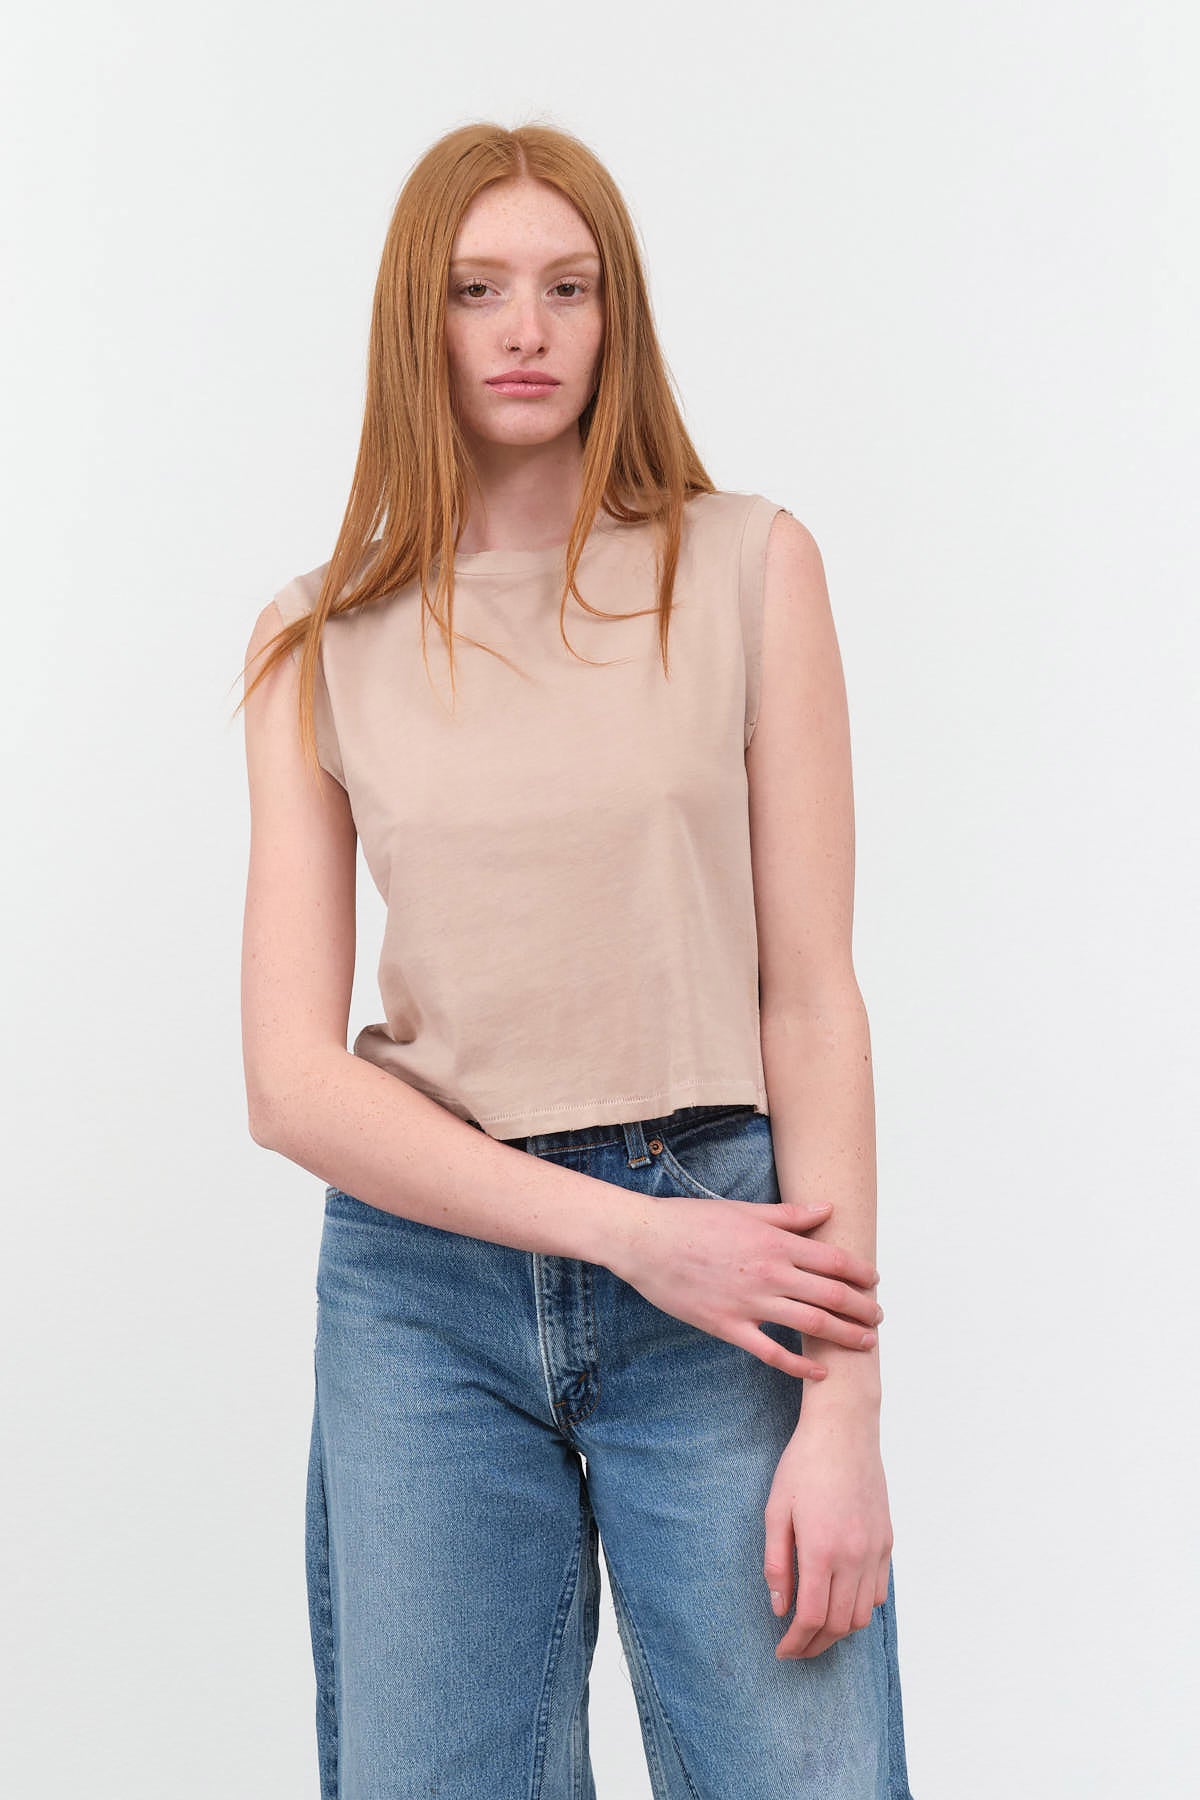 Styled Sleeveless Babe Tee in Taupe